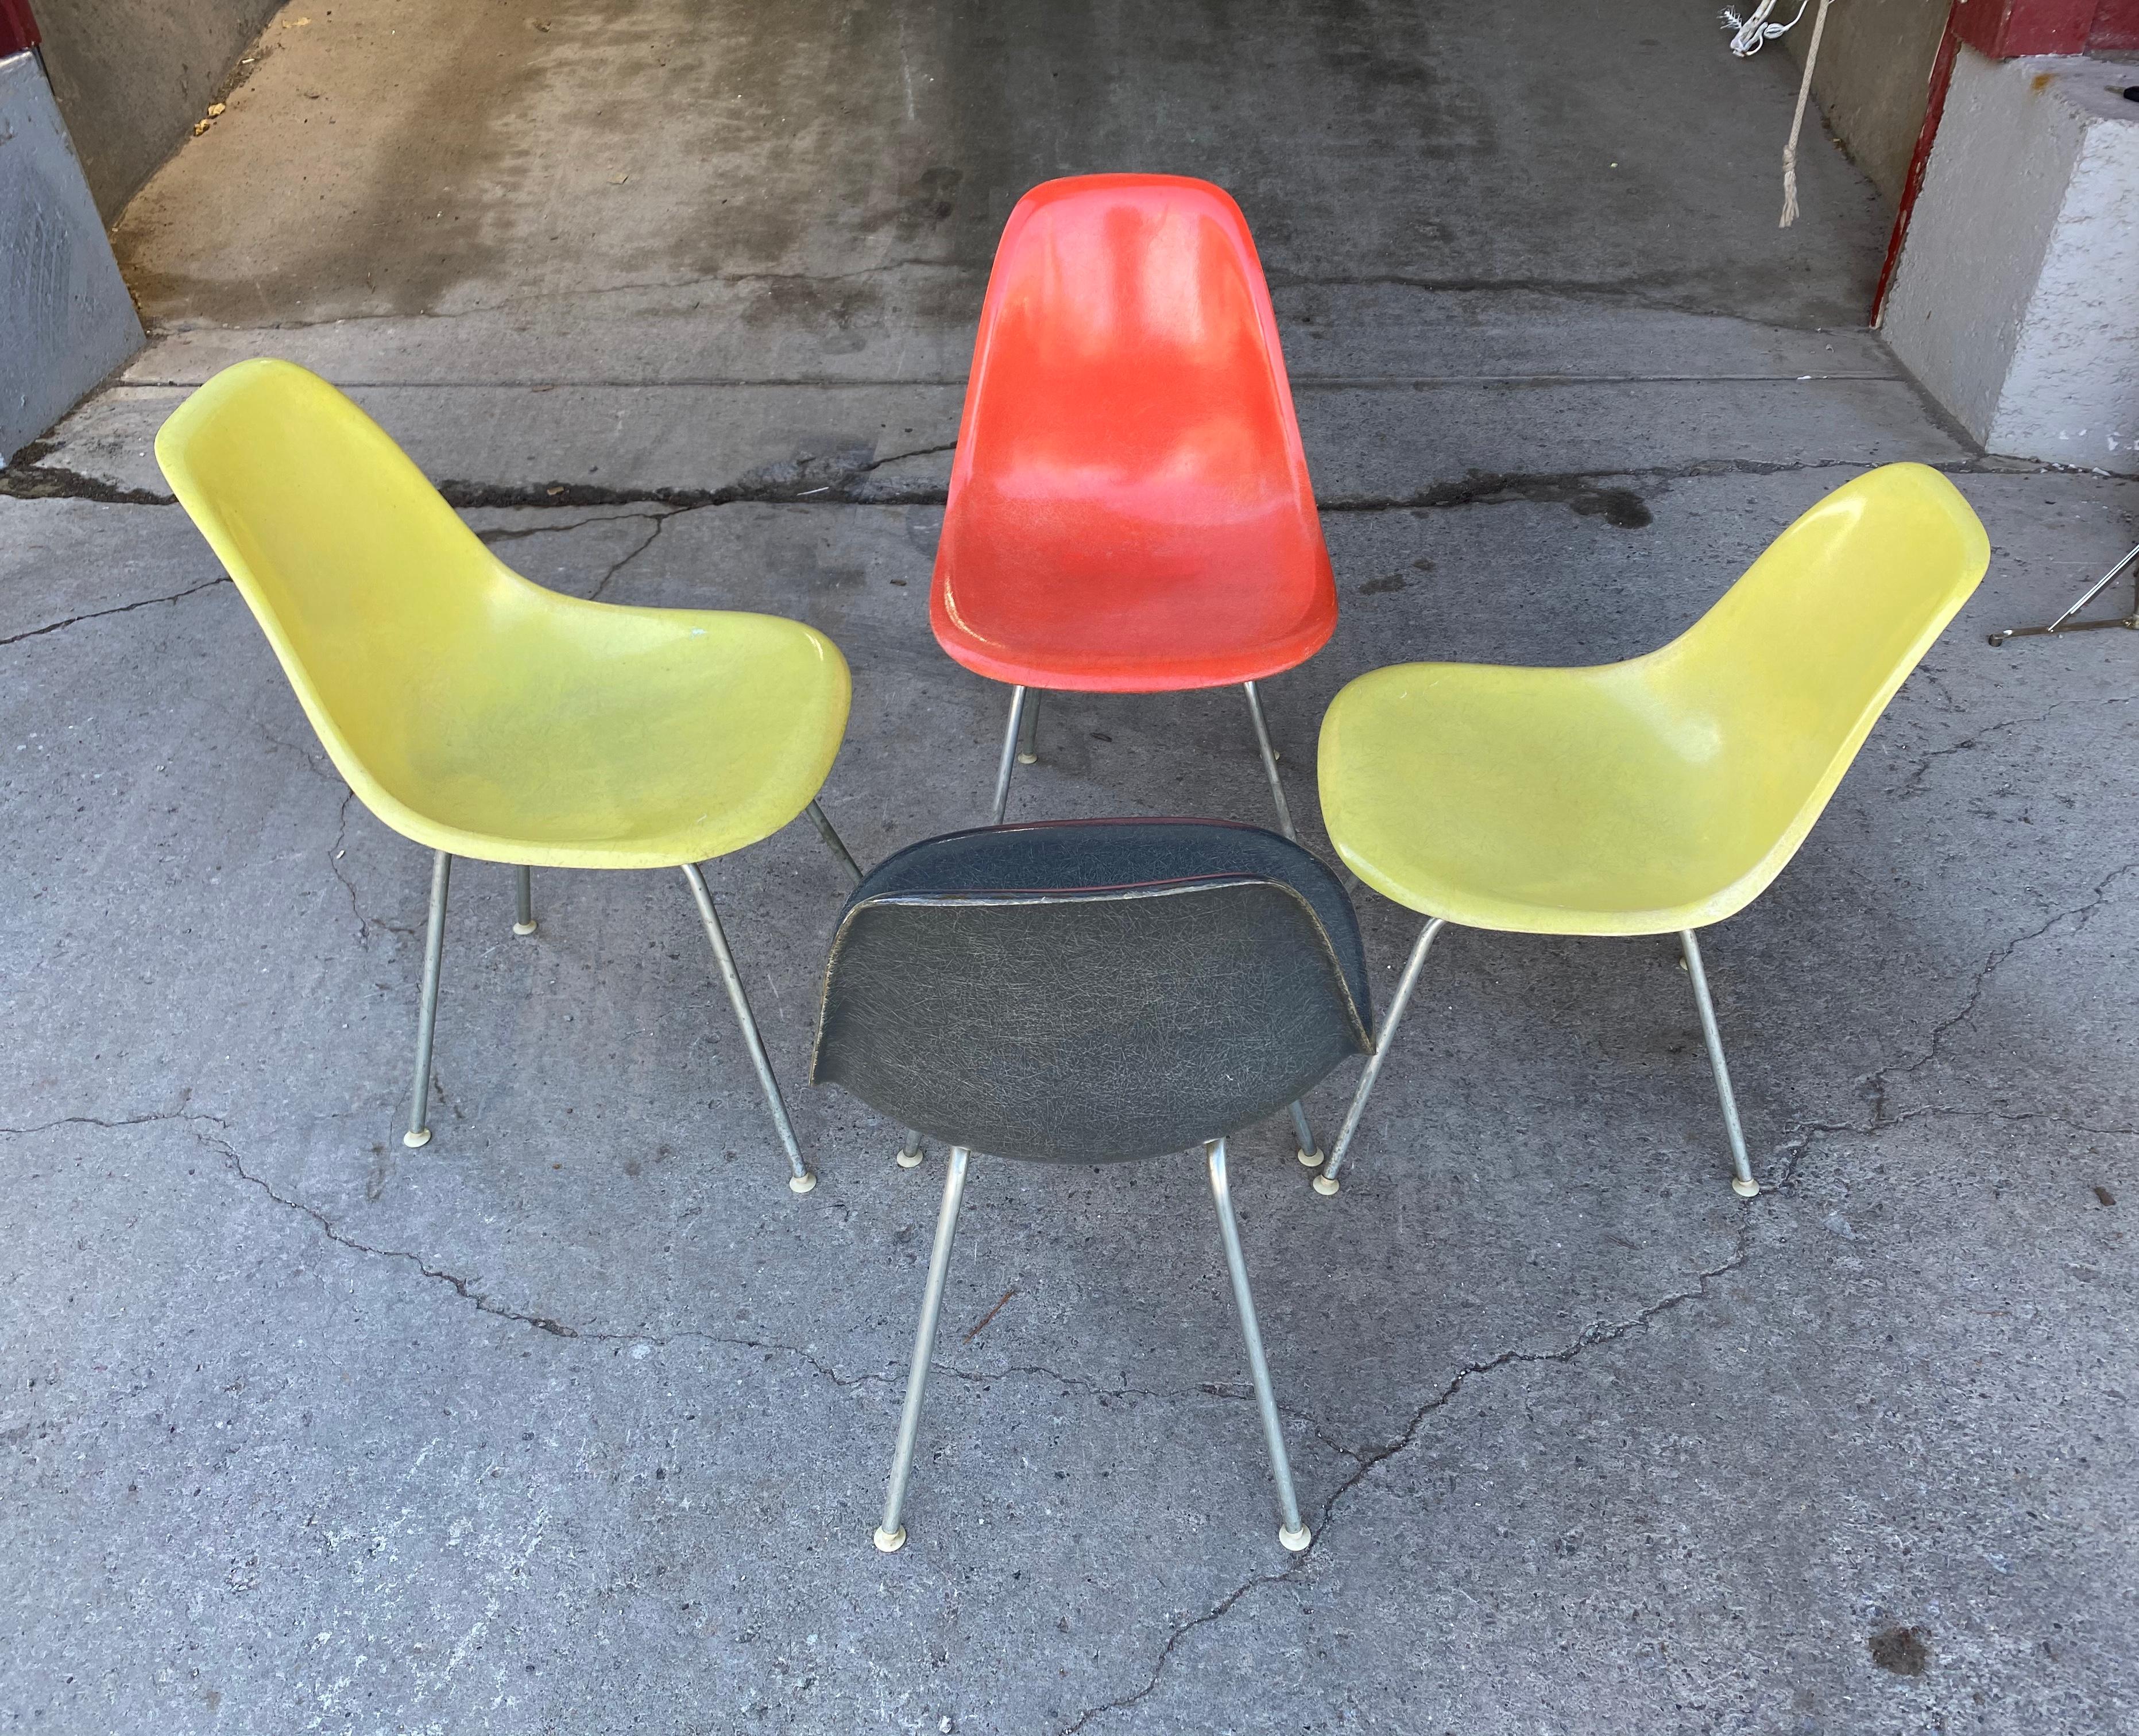 Classic Set of 4 Charles Eames Fiberglass Scoop /Side Chairs 1950s Herman Miller 1